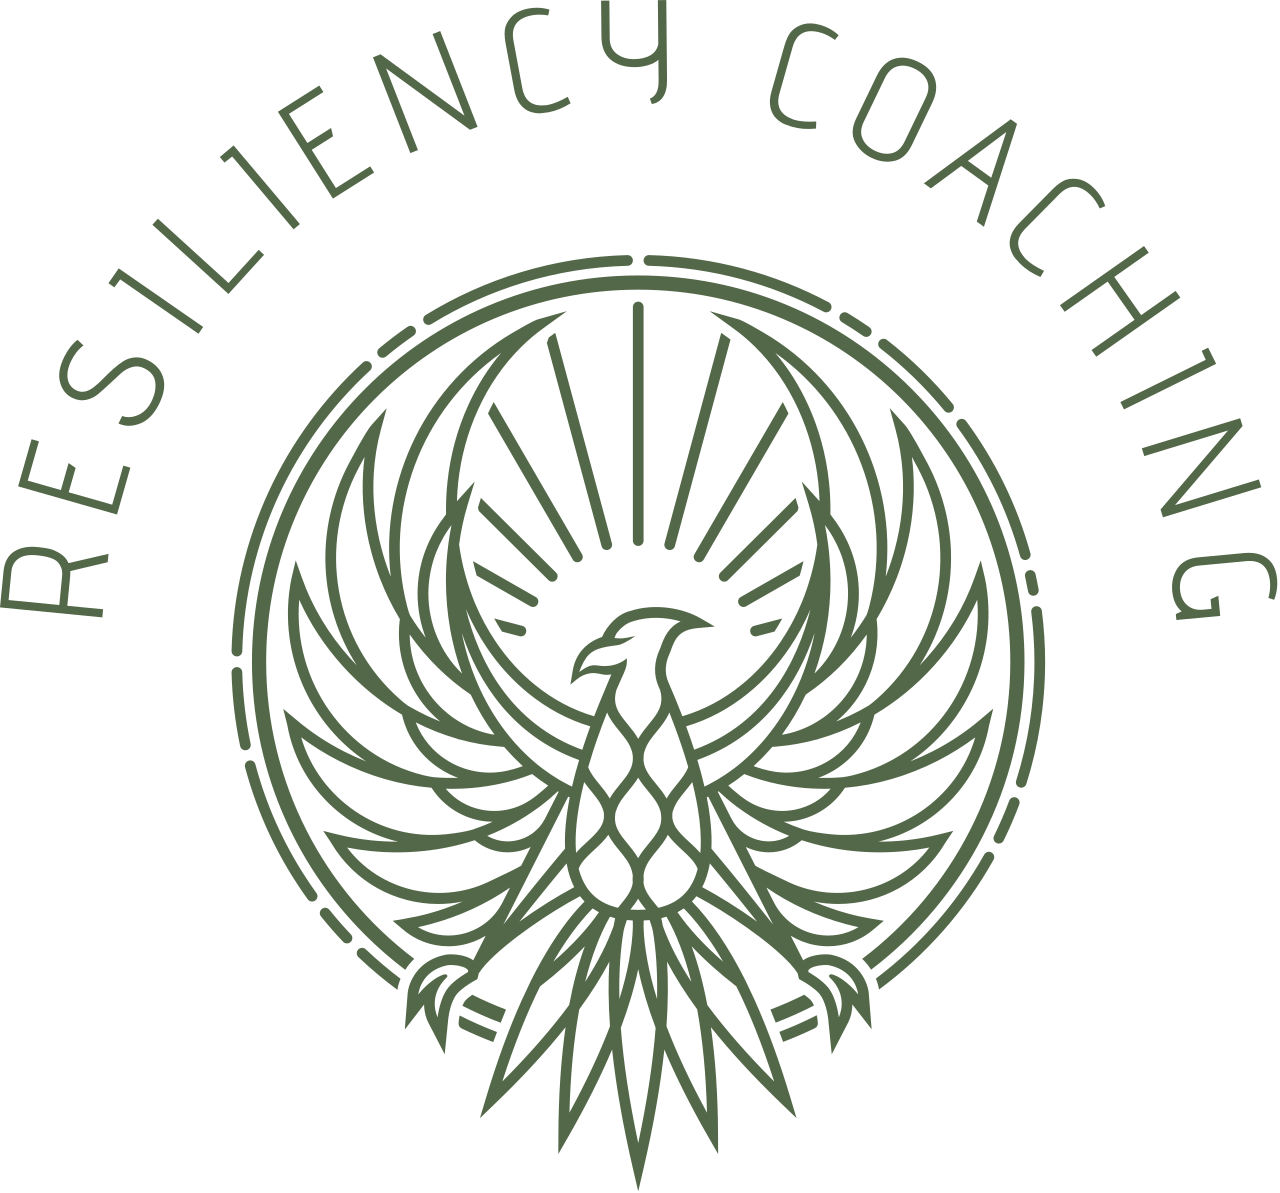 RESILIENCY COACHING's web page